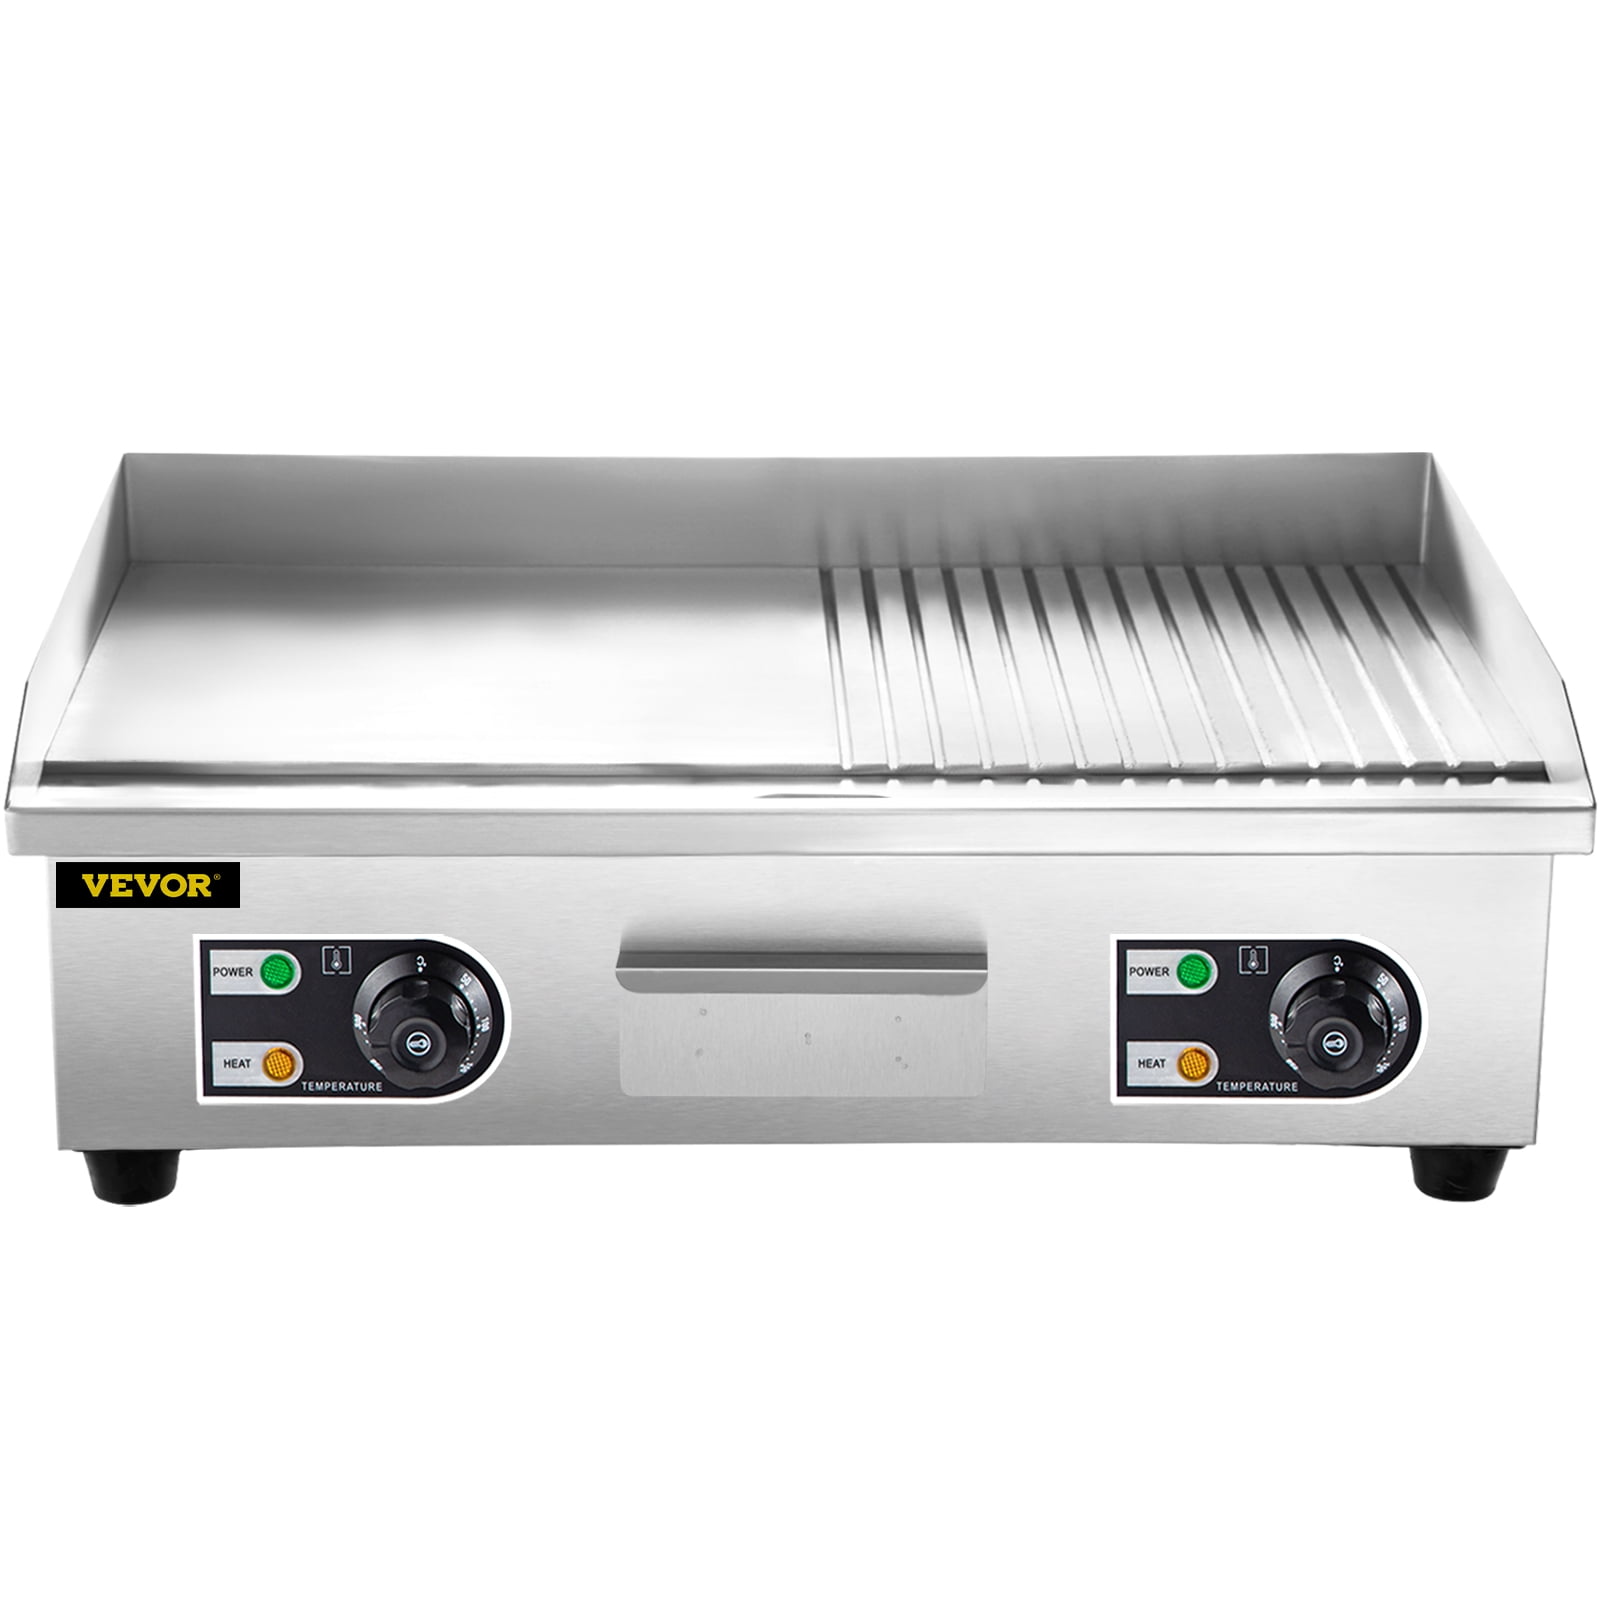 VEVORbrand 14 Electric Countertop Flat Top Griddle 110V 1500W Non-Stick  Teppanyaki Grill Stainless Steel Adjustable Temperature Control 122° F -  572° F, Silver 